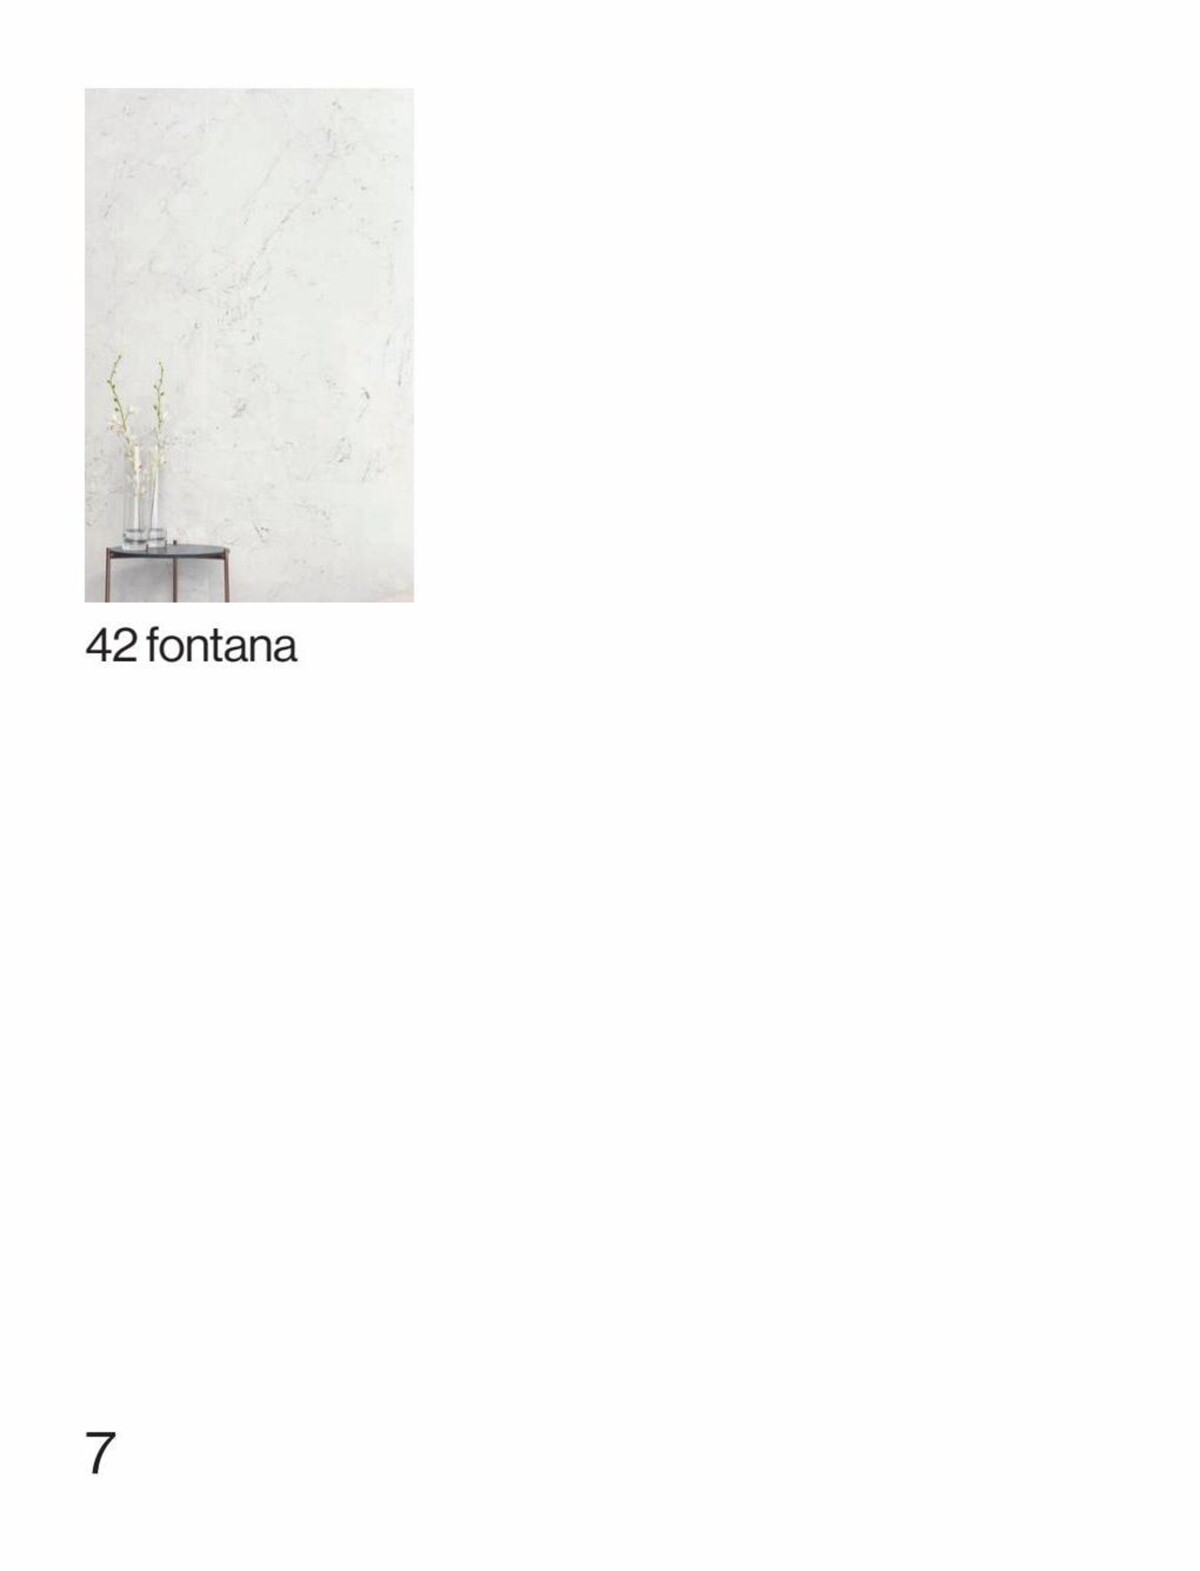 Catalogue MARMI,a ceramic tile that echoes the purity of marble, page 00007